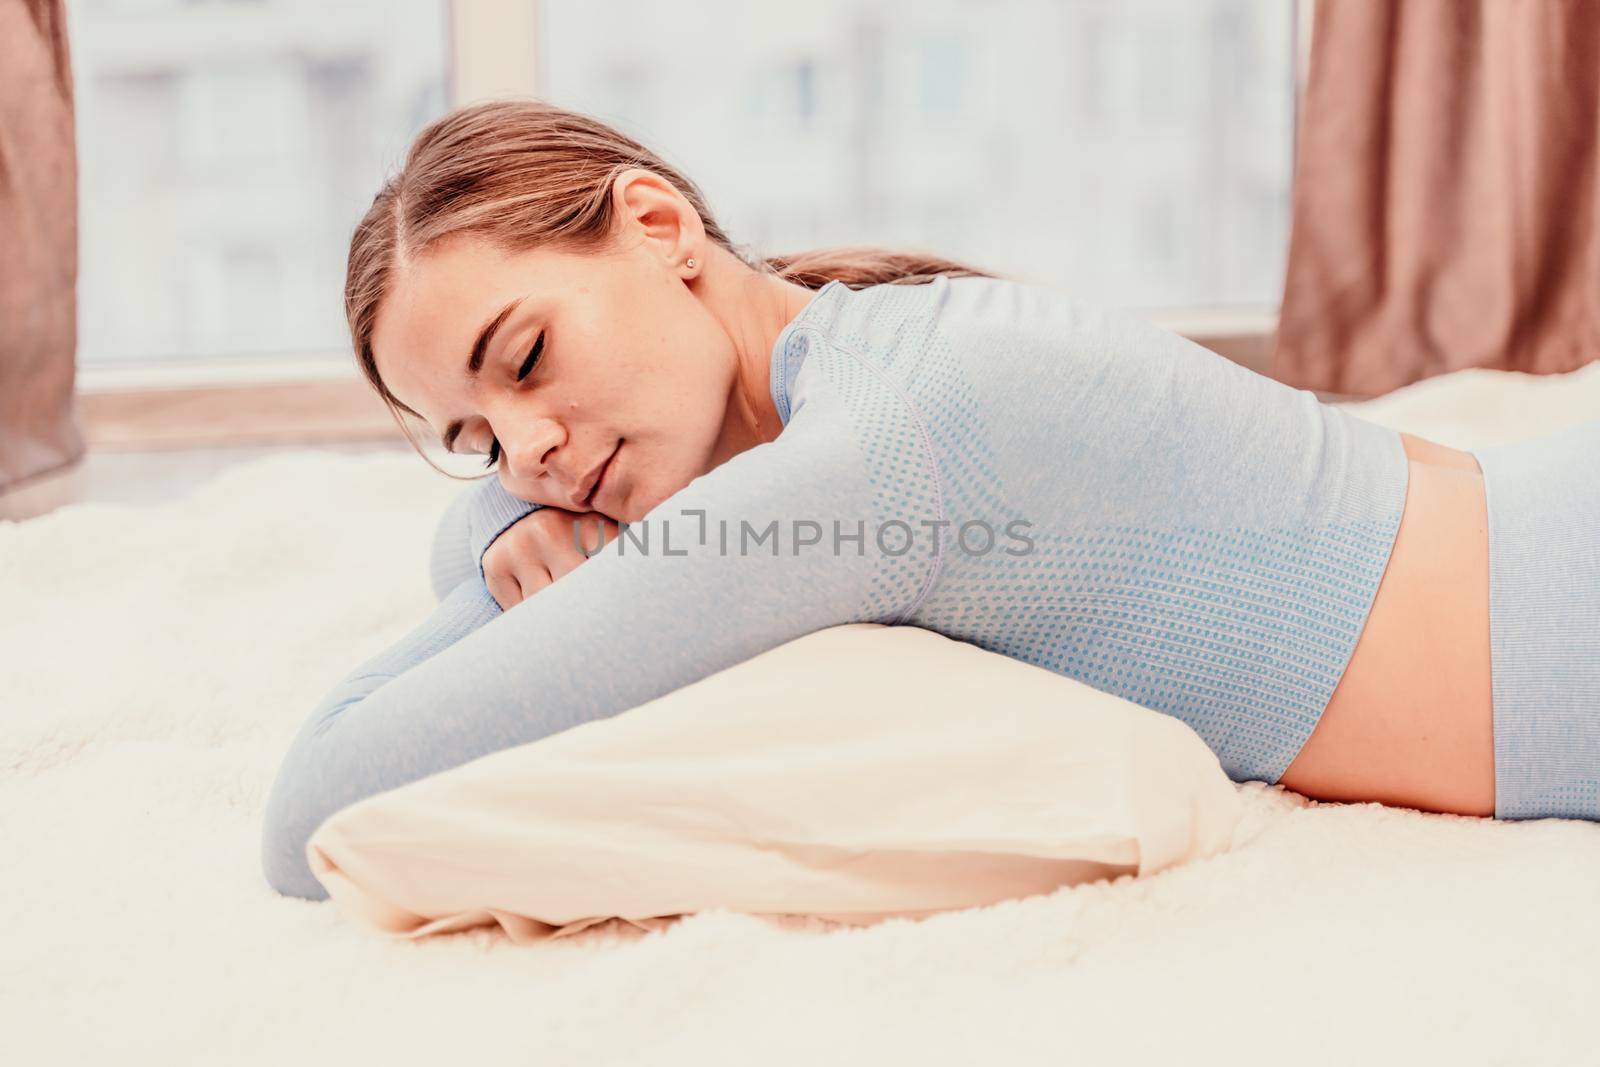 Side view portrait of relaxed woman with long hair lying on carpet at home. She is dressed in a blue tracksuit, holding a phone in her hands